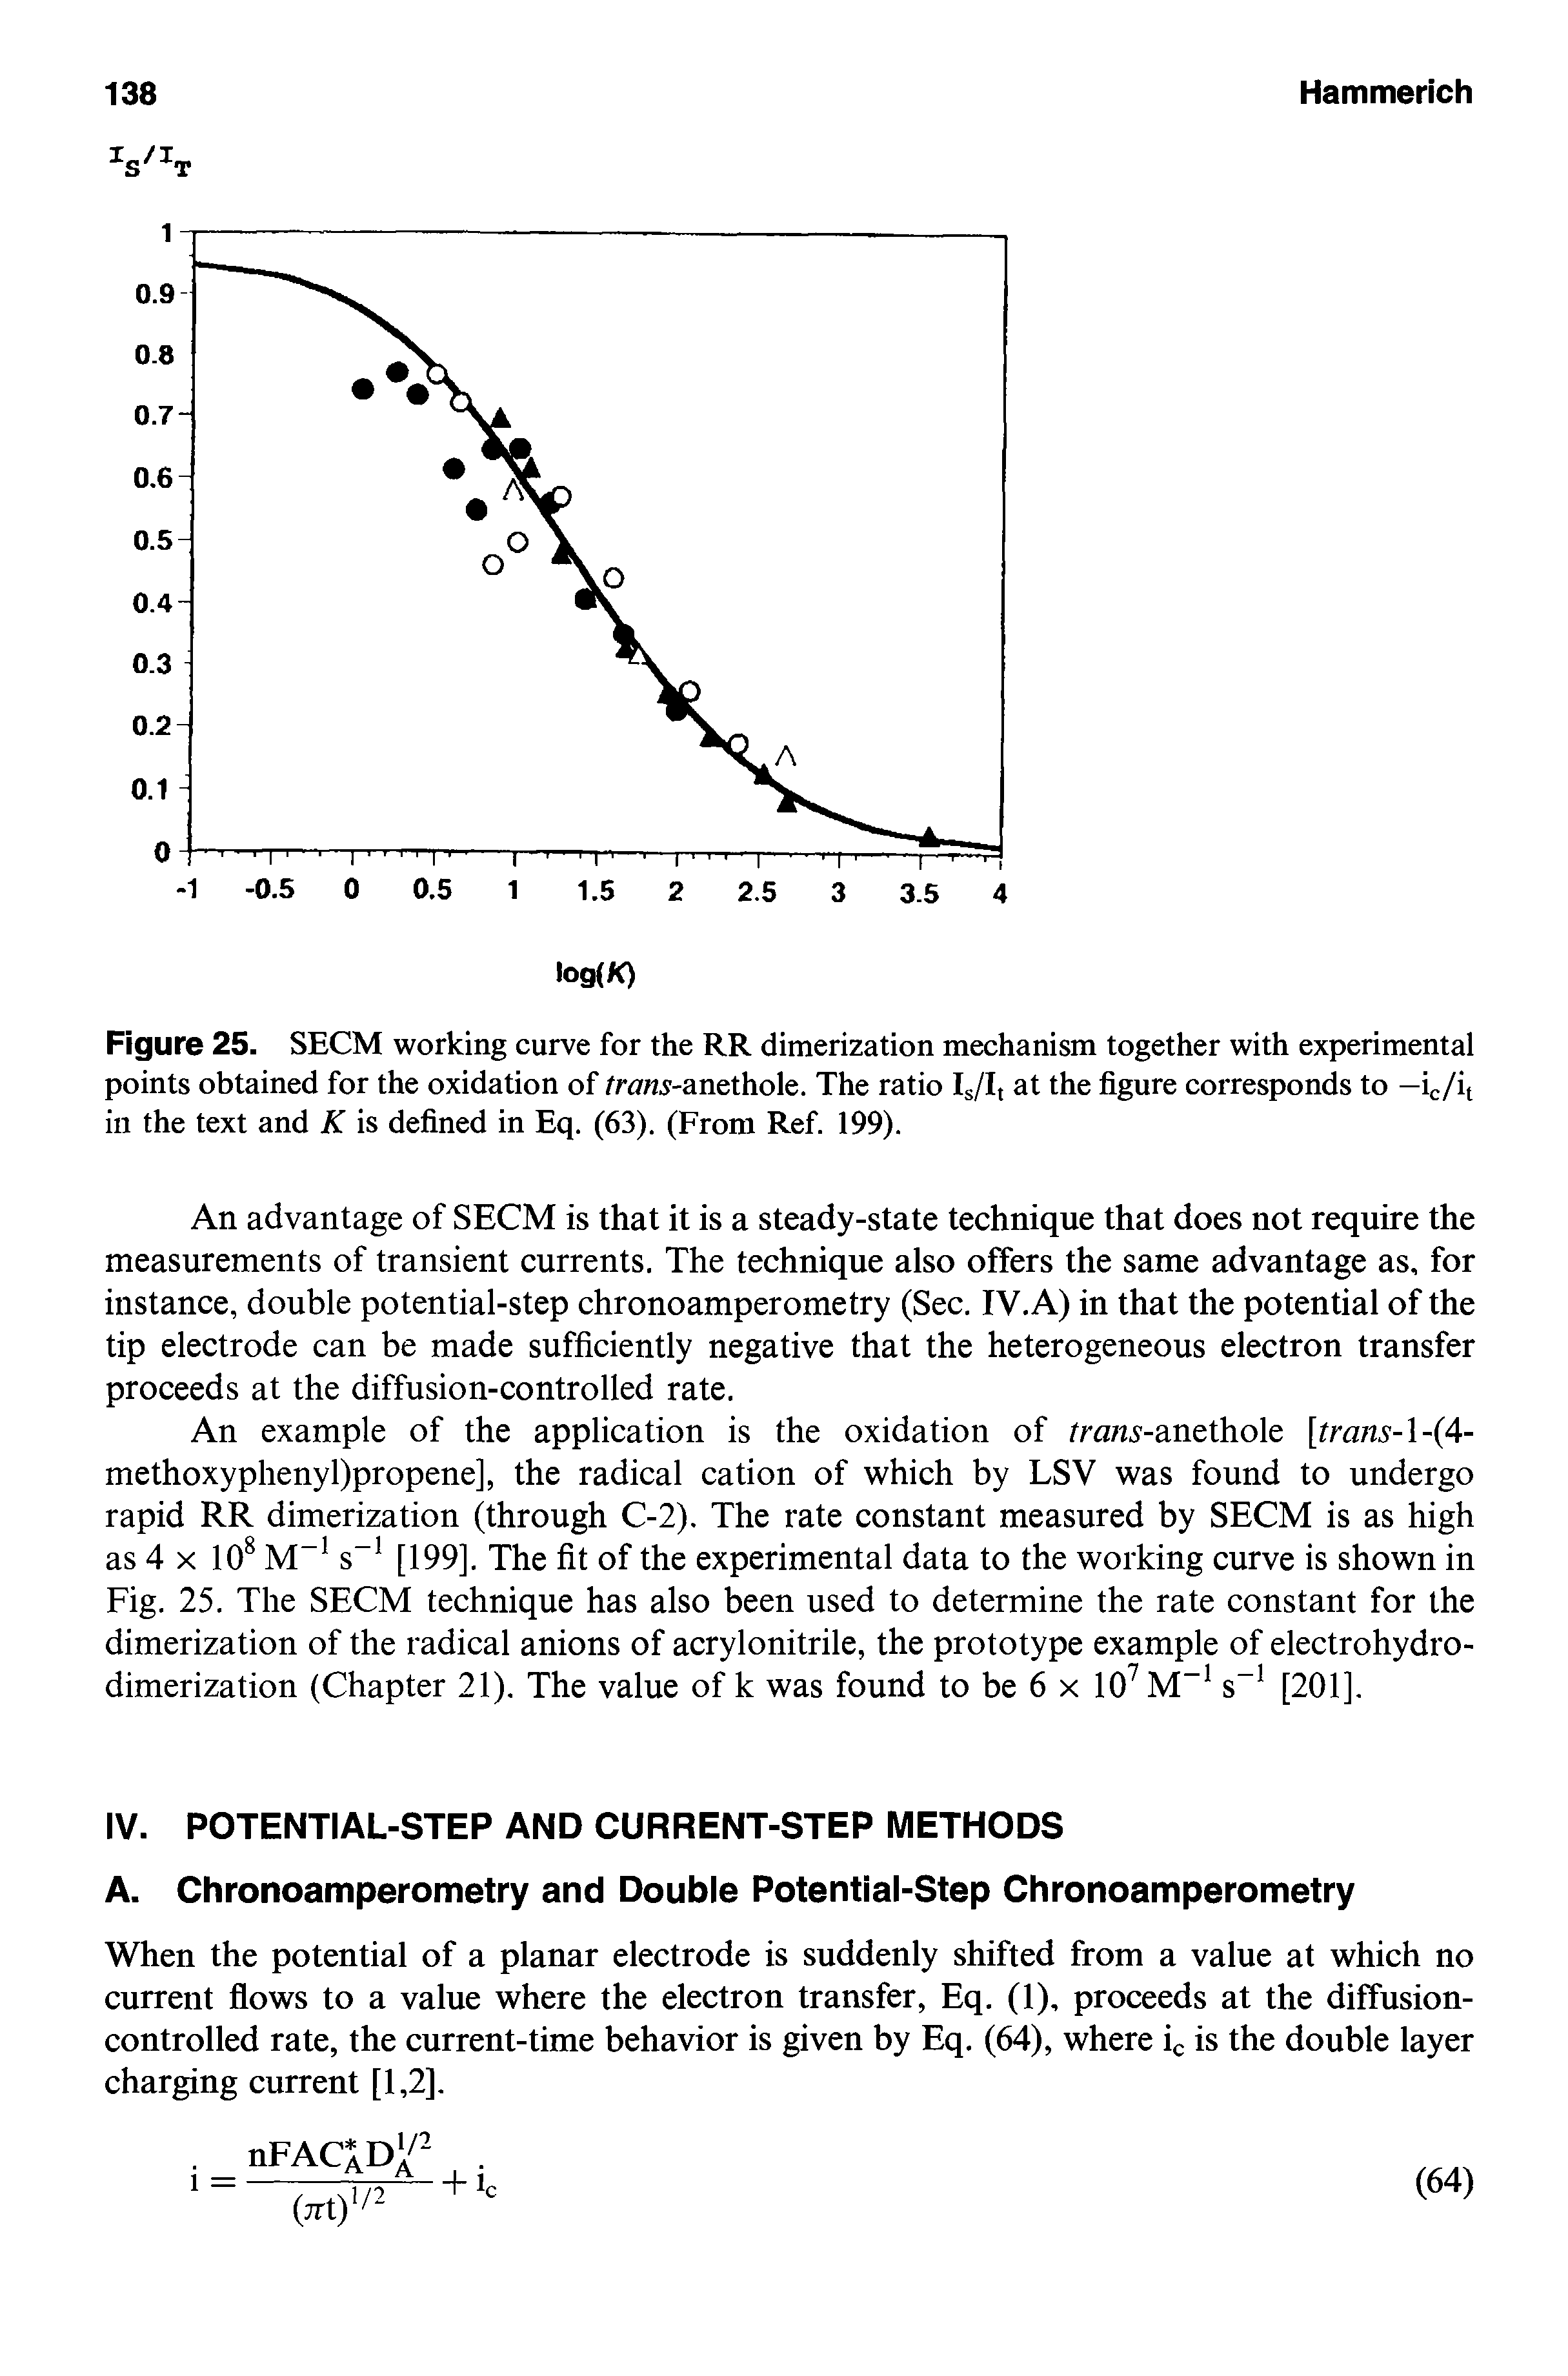 Figure 25. SECM working curve for the RR dimerization mechanism together with experimental points obtained for the oxidation of fra/j -anethole. The ratio Ig/It at the figure corresponds to —. Jh in the text and K is defined in Eq. (63). (From Ref. 199).